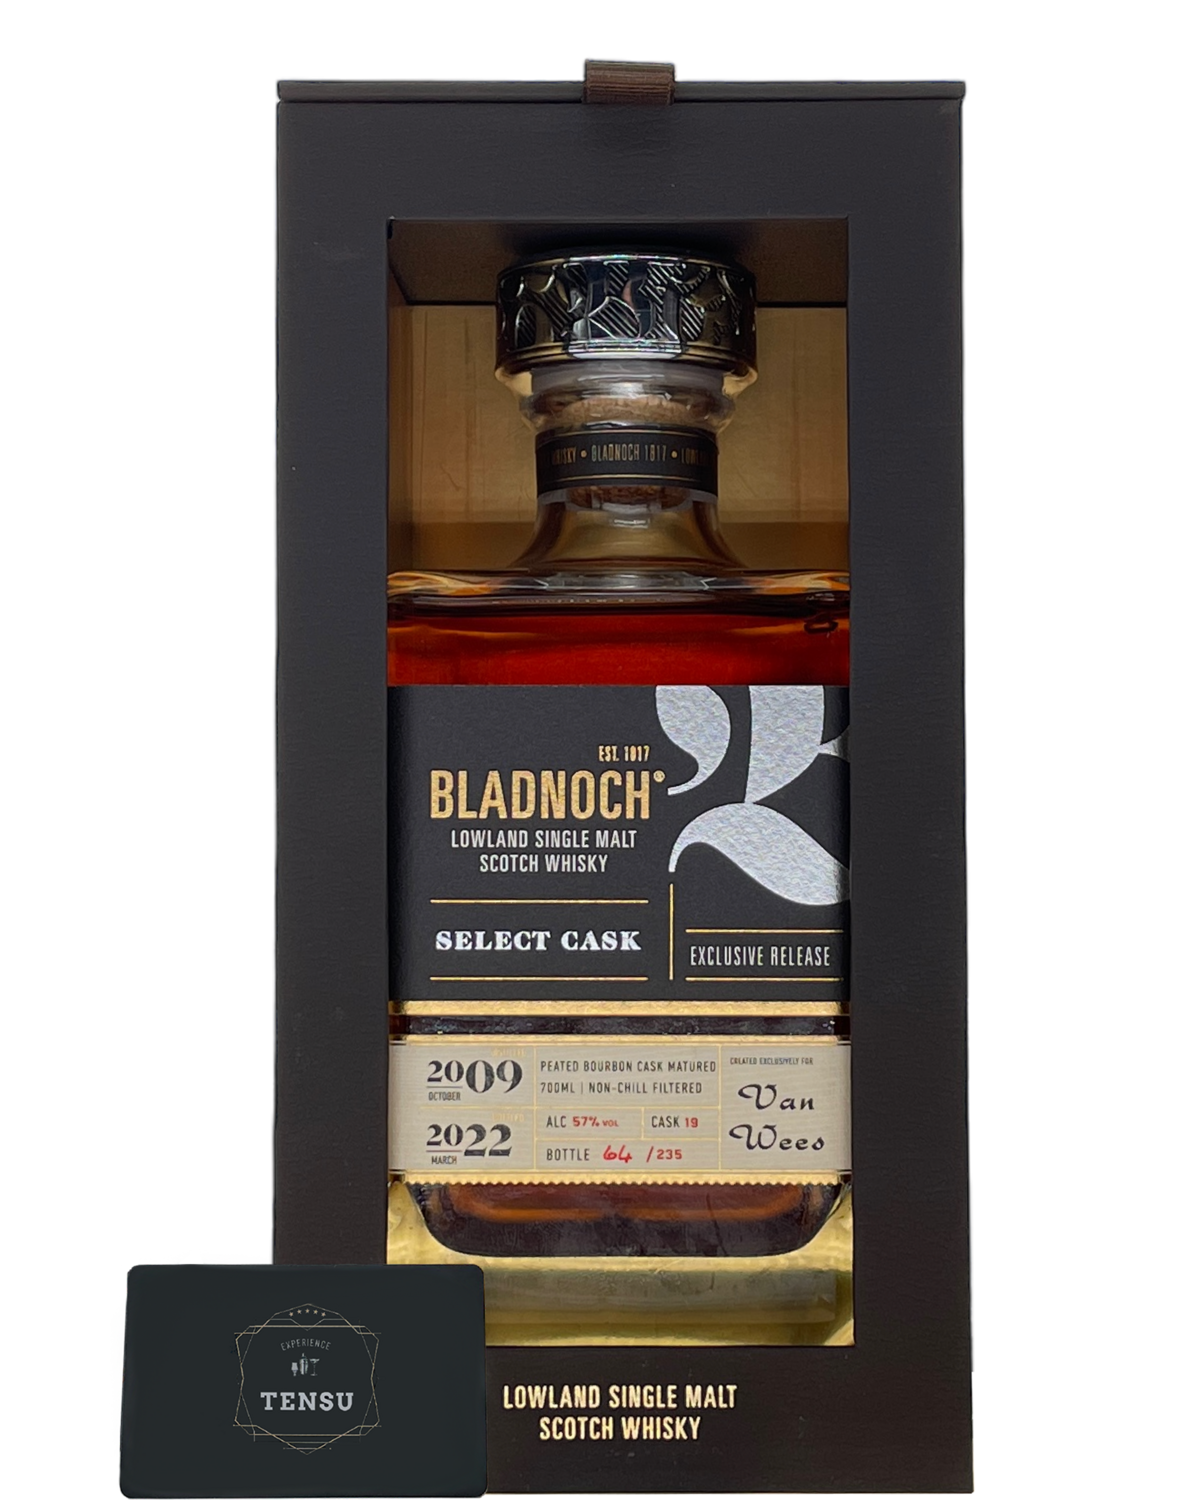 Bladnoch Select Cask (2009-2022) Peated Bourbon Cask 57.0 "For Van Wees"